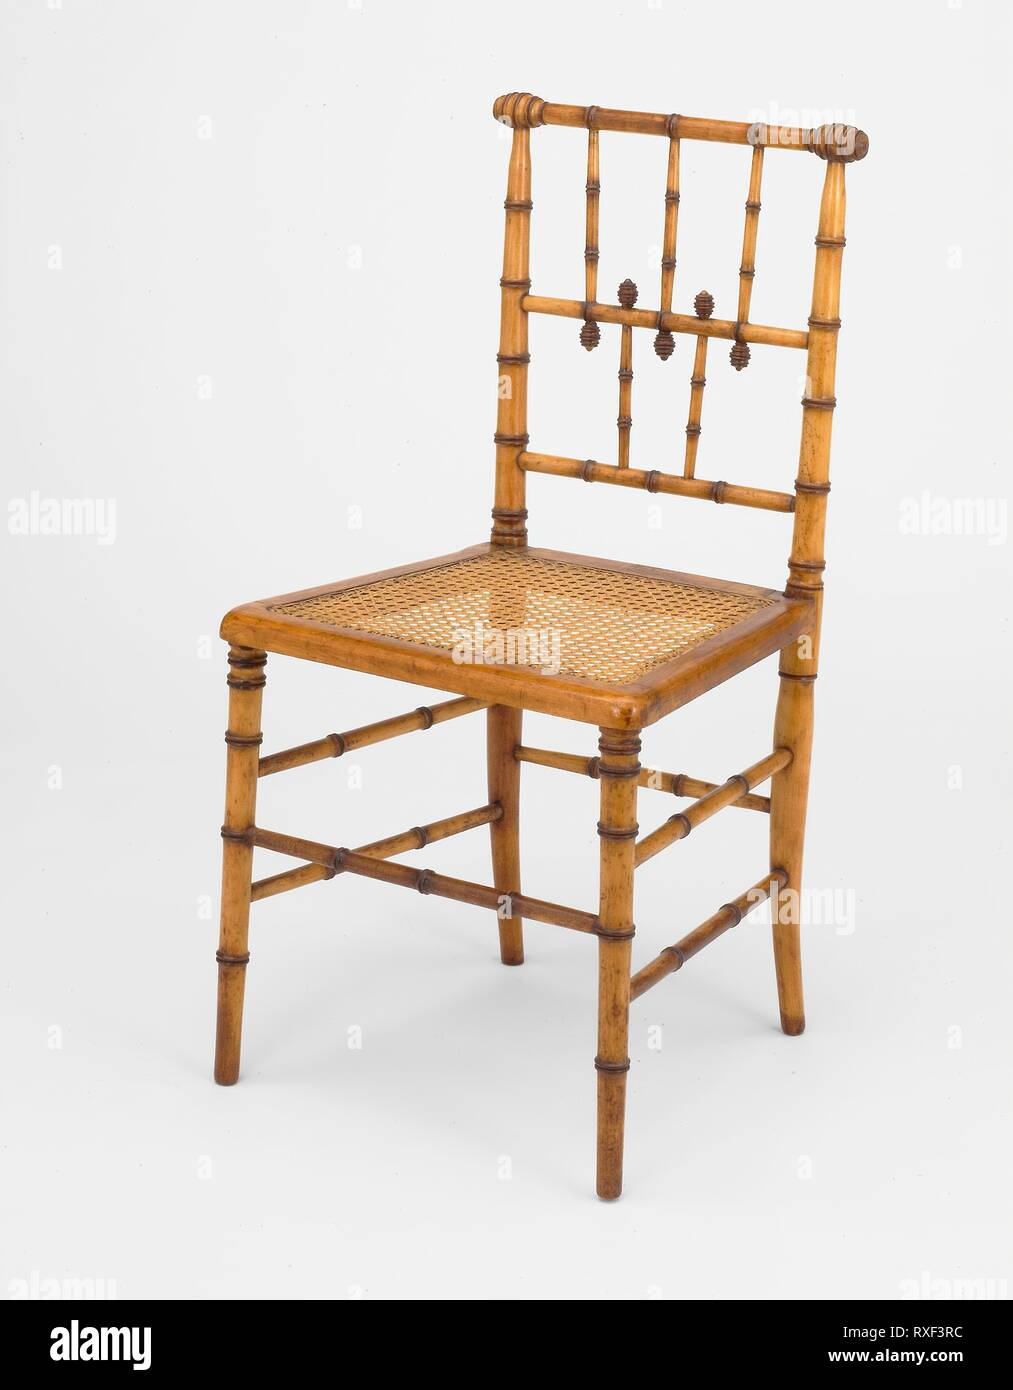 Side Chair. Attributed to R. J. Horner and Company; American, active 1886-c. 1915; New York, New York. Date: 1885-1895. Dimensions: 87.6 × 46.4 × 42.6 cm (34 1/2 × 17 1/2 × 16 in.). Maple and birds-eye maple. Origin: New York. Museum: The Chicago Art Institute. Stock Photo